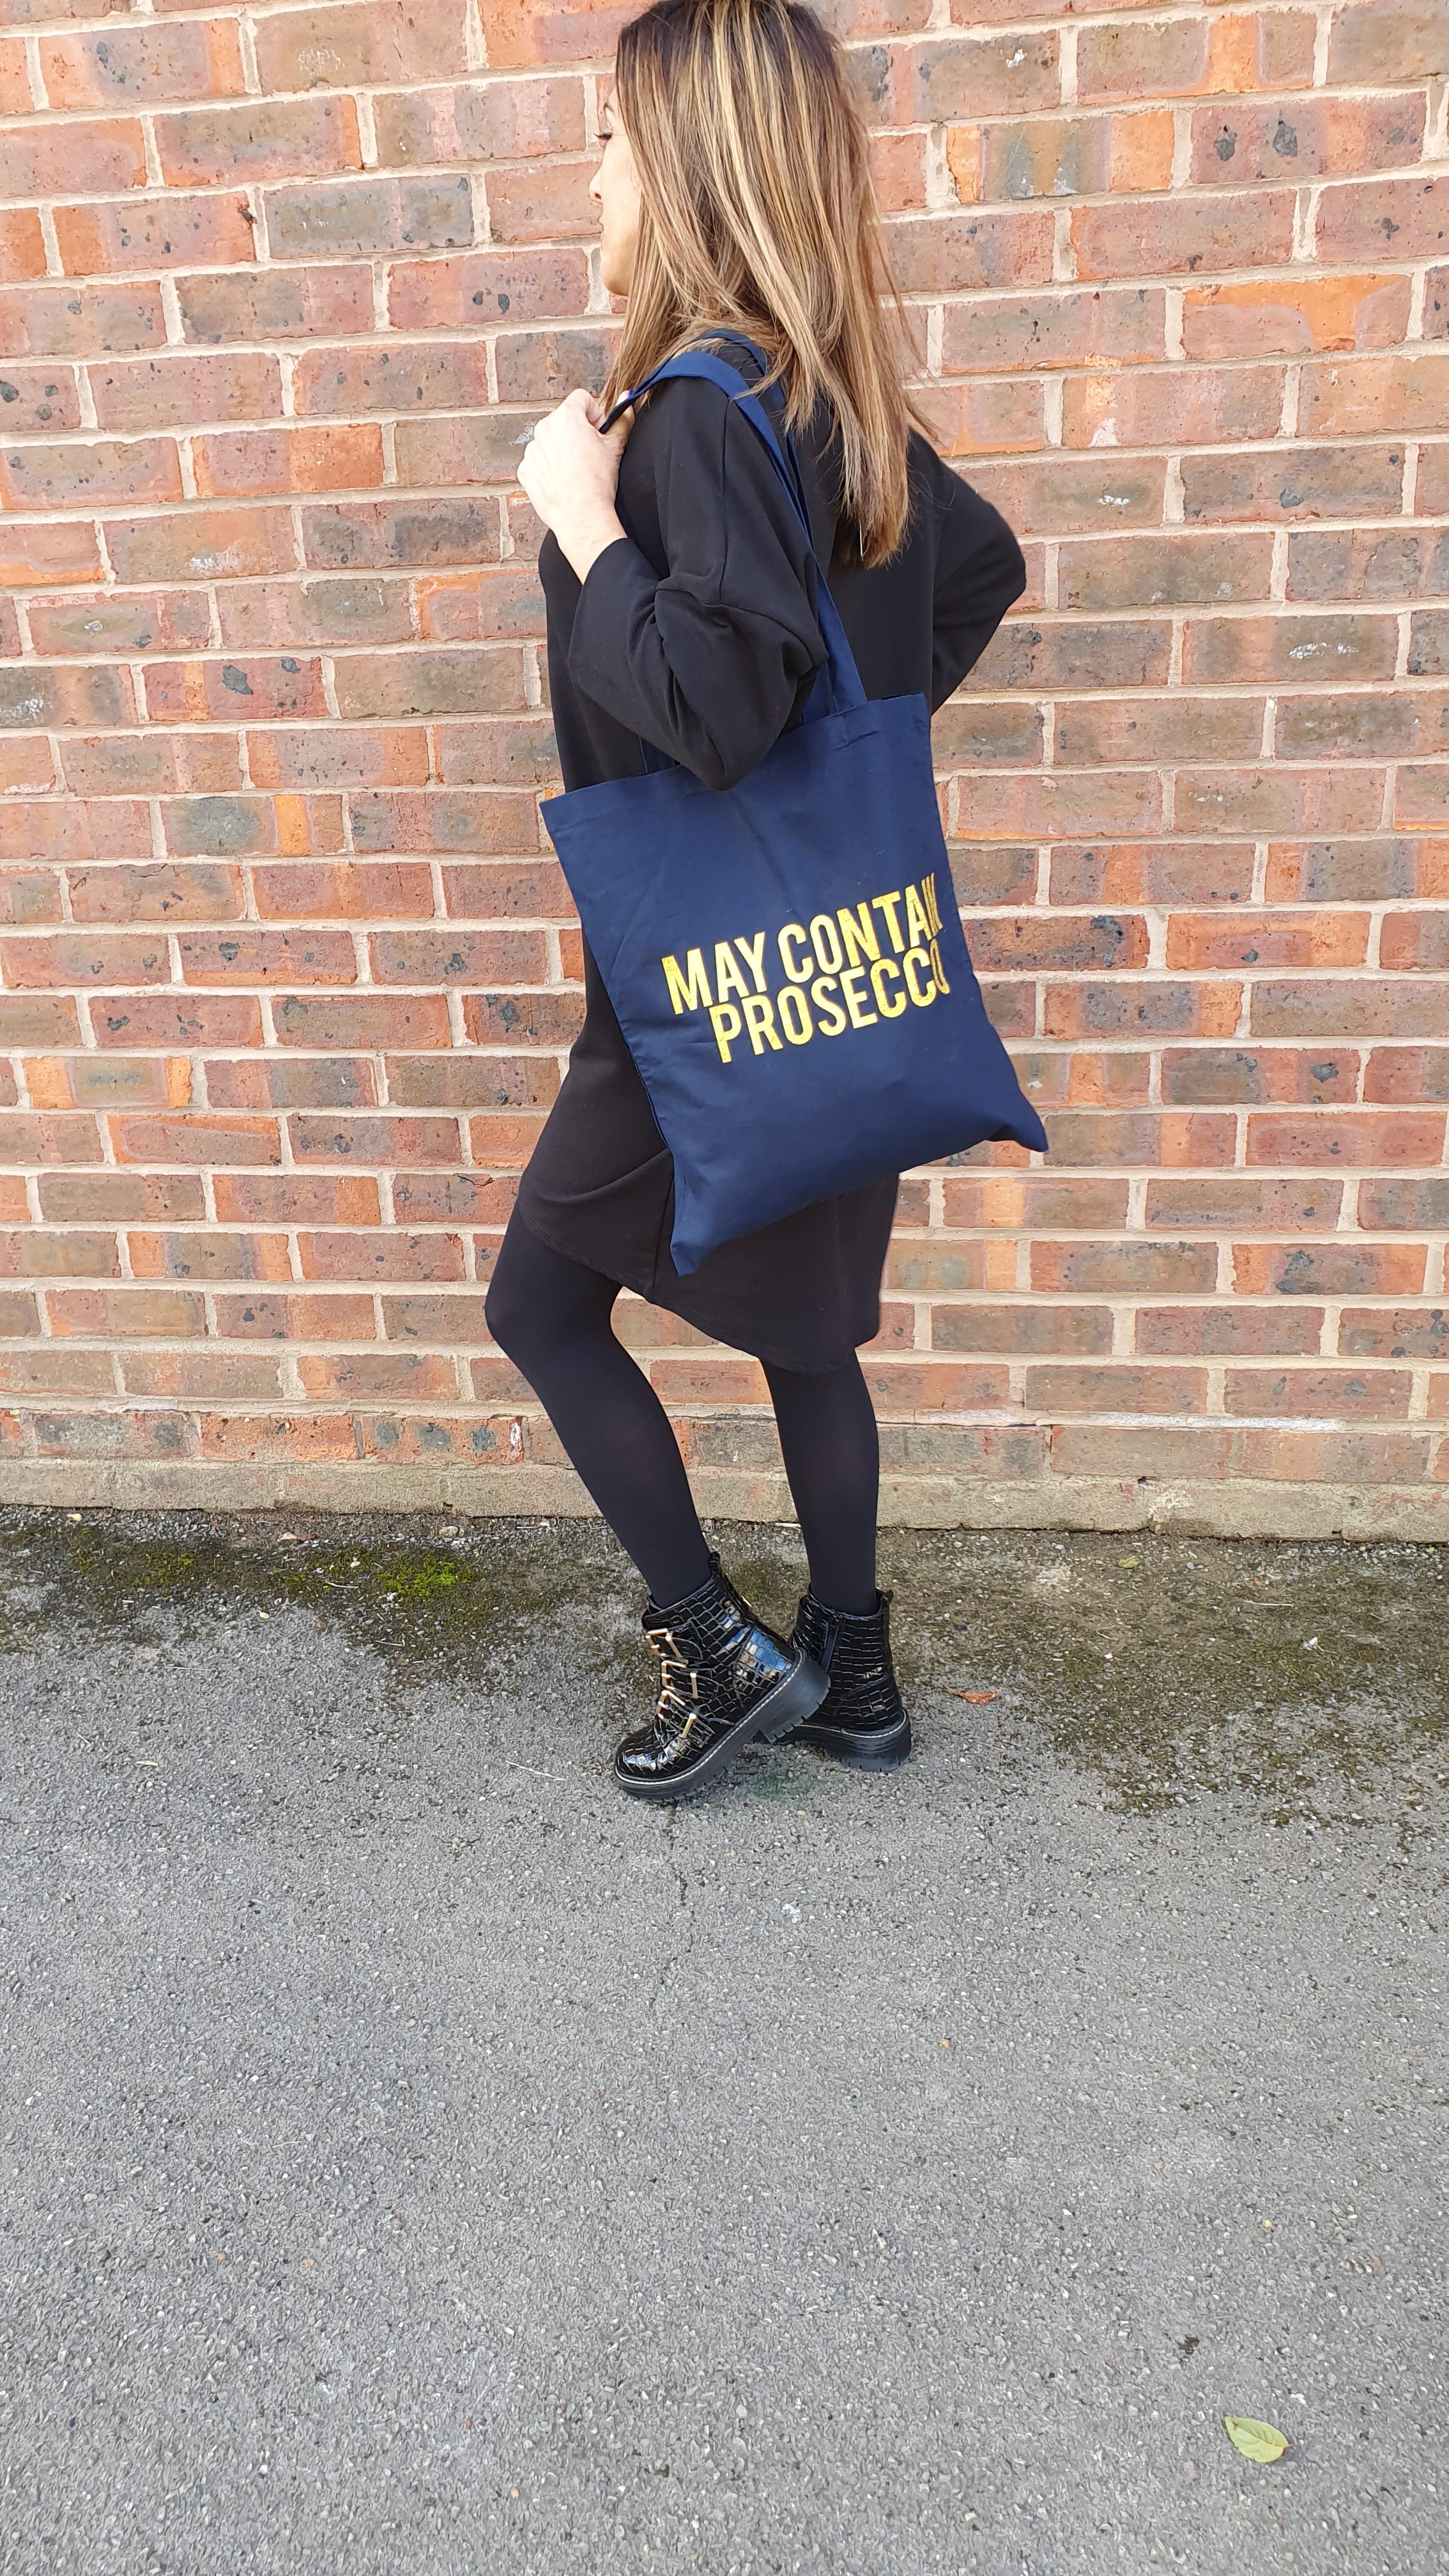 May Contain Prosecco Glitter Tote Bag In Navy